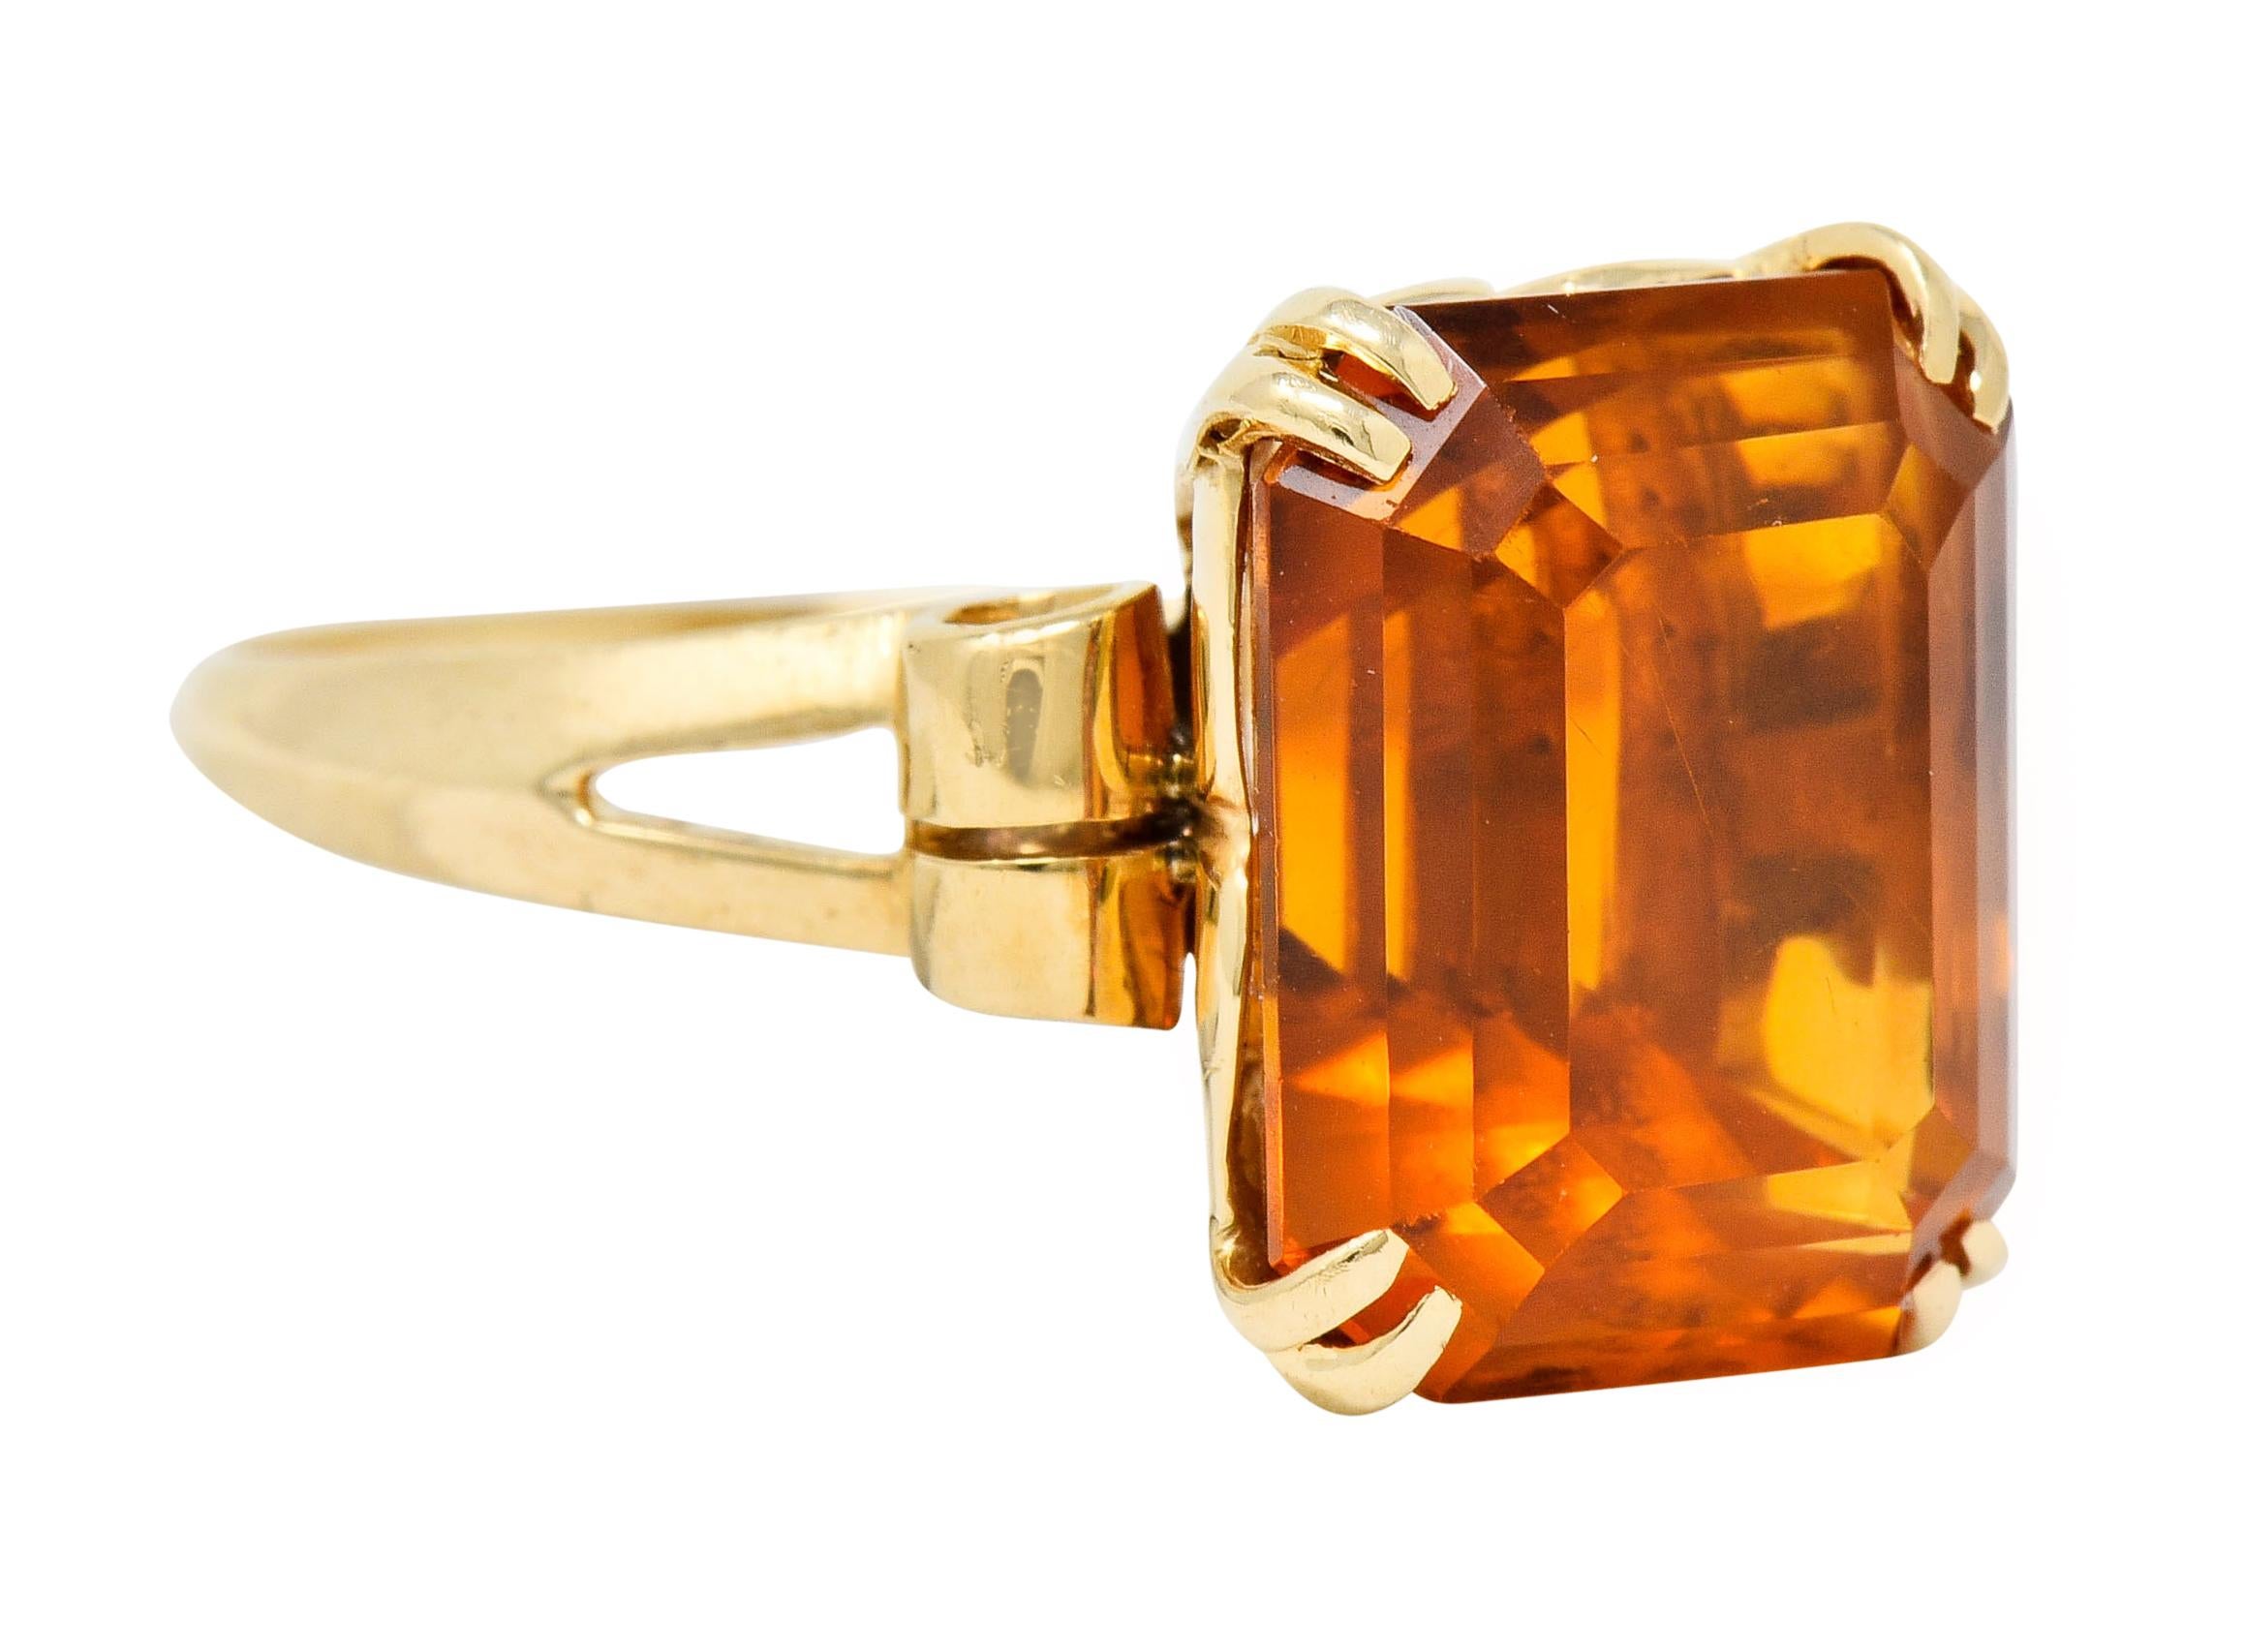 Centering a rectangular step cut citrine weighing 7.25 carats, transparent with a deep rich orange color

Set by split prongs in a decorative basket and is completed by scrolled shoulders

Signed Tiffany & Co. 

Ring Size: 7 & sizable

Measures: